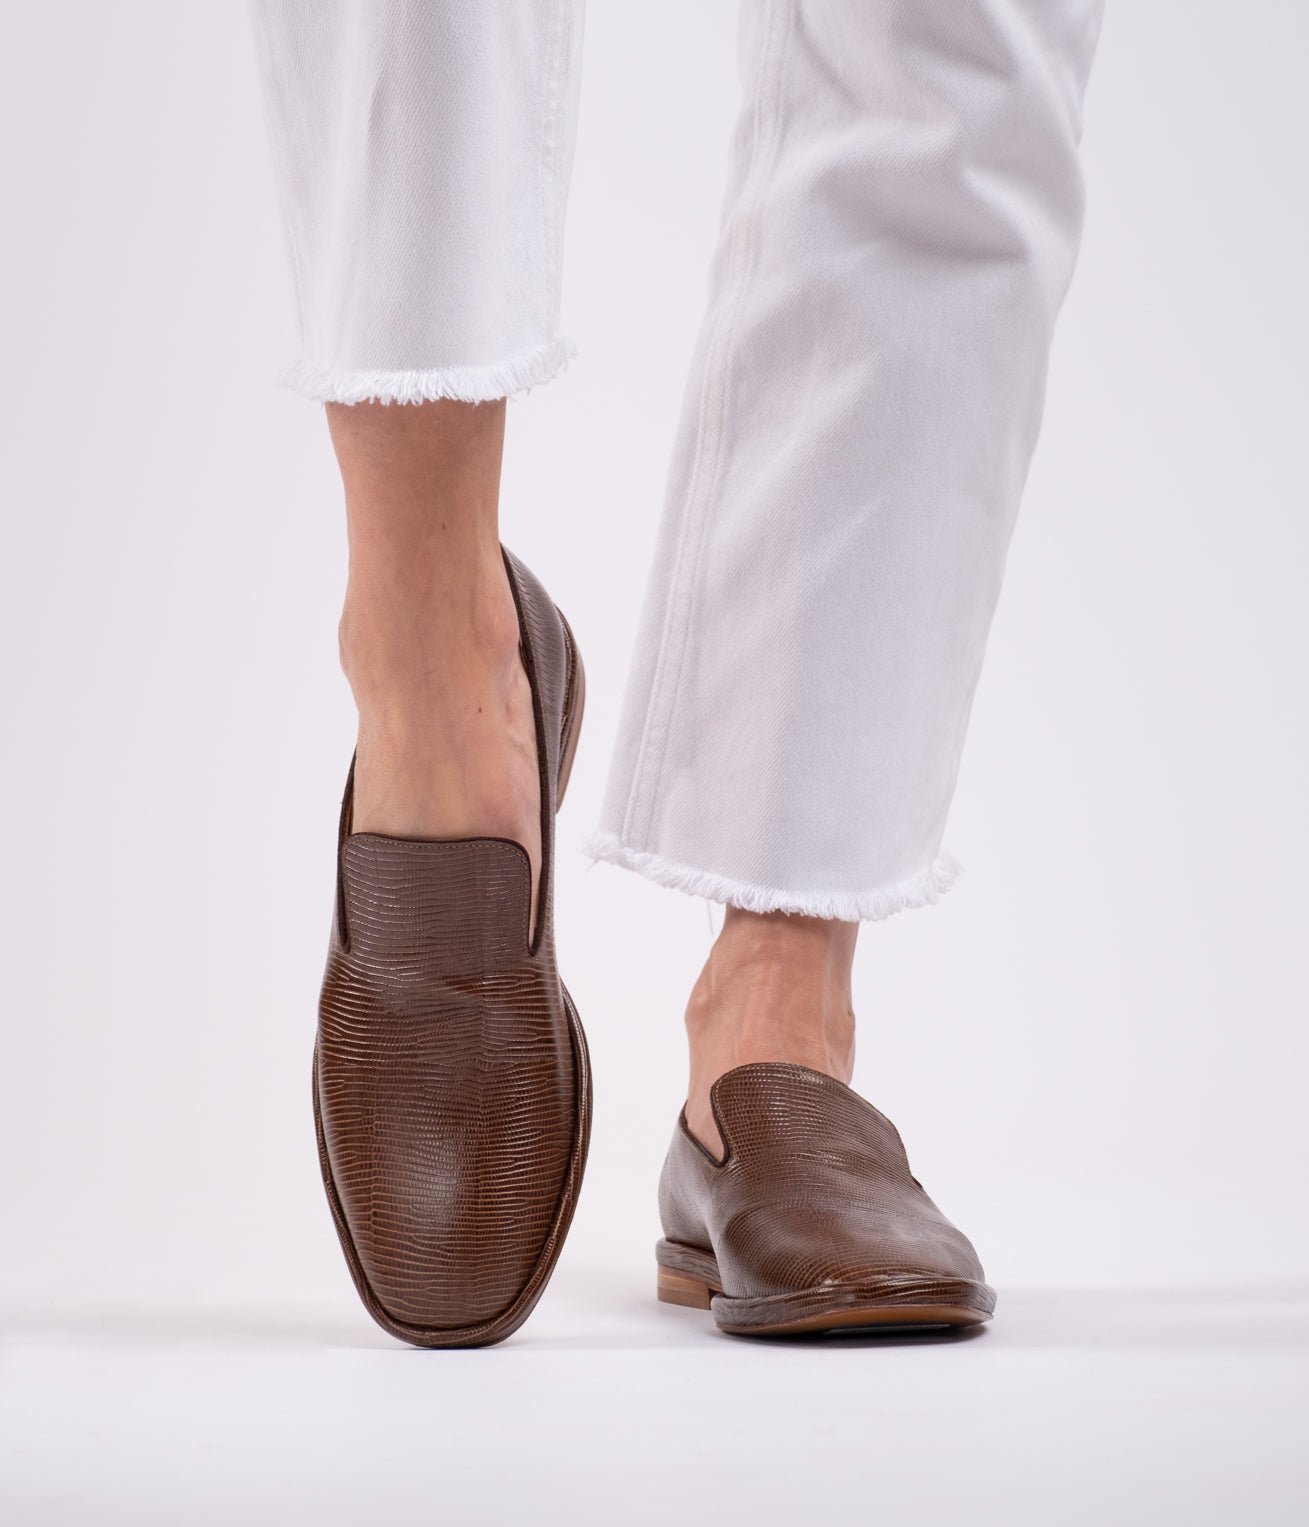 LOAFERS - OLYMPIA loafers, brown lizard printed || OUTLET - OLYMPIAT7COFMTEM350 - Clergerie Paris - USA